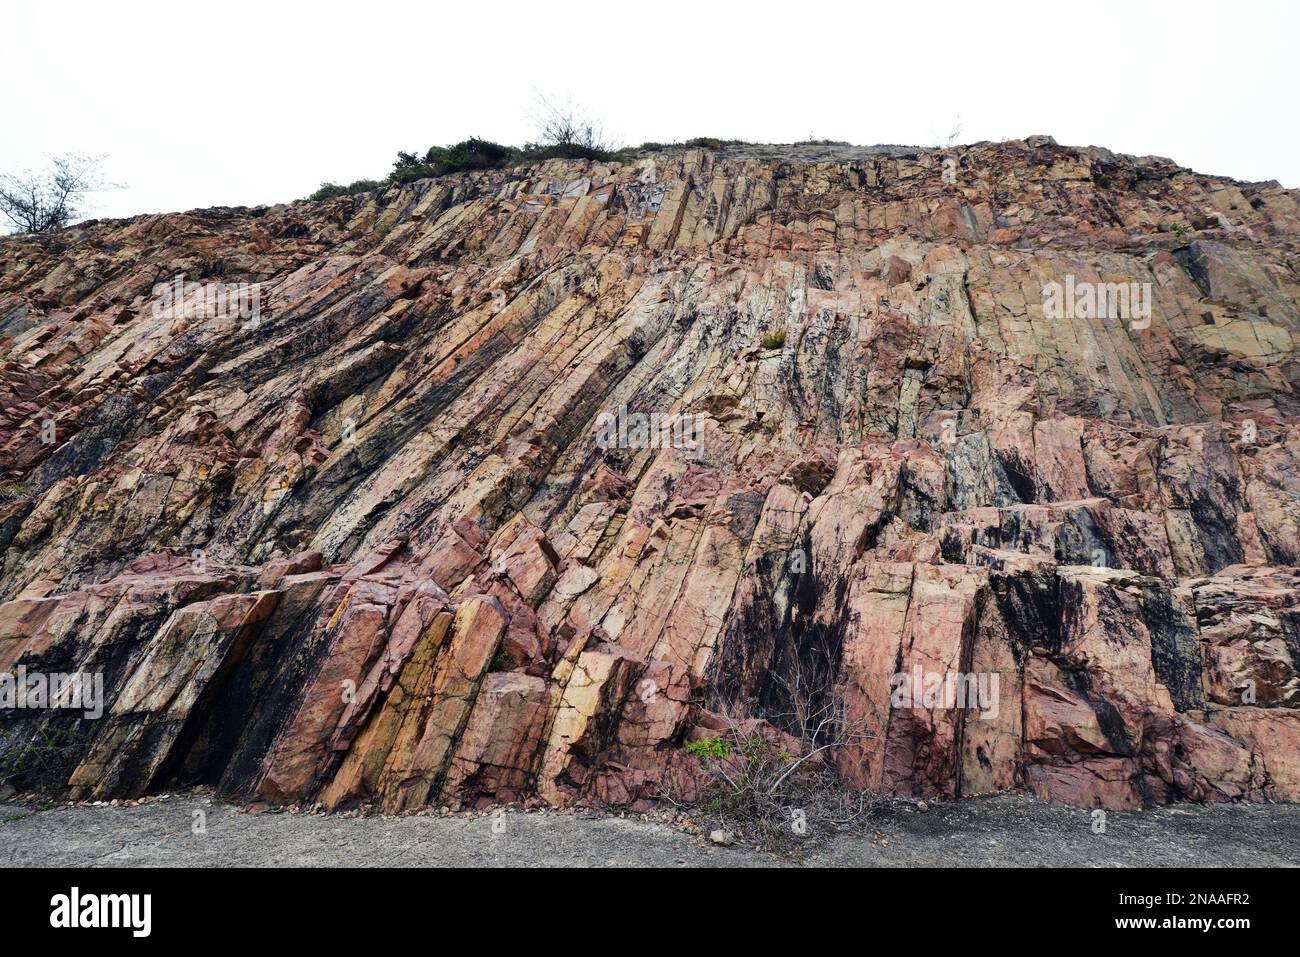 Early Cretaceous rhyolitic columnar rock formation located in the UNESCO Global Geopark in Sai Kung East Country Park in Hong Kong. Stock Photo